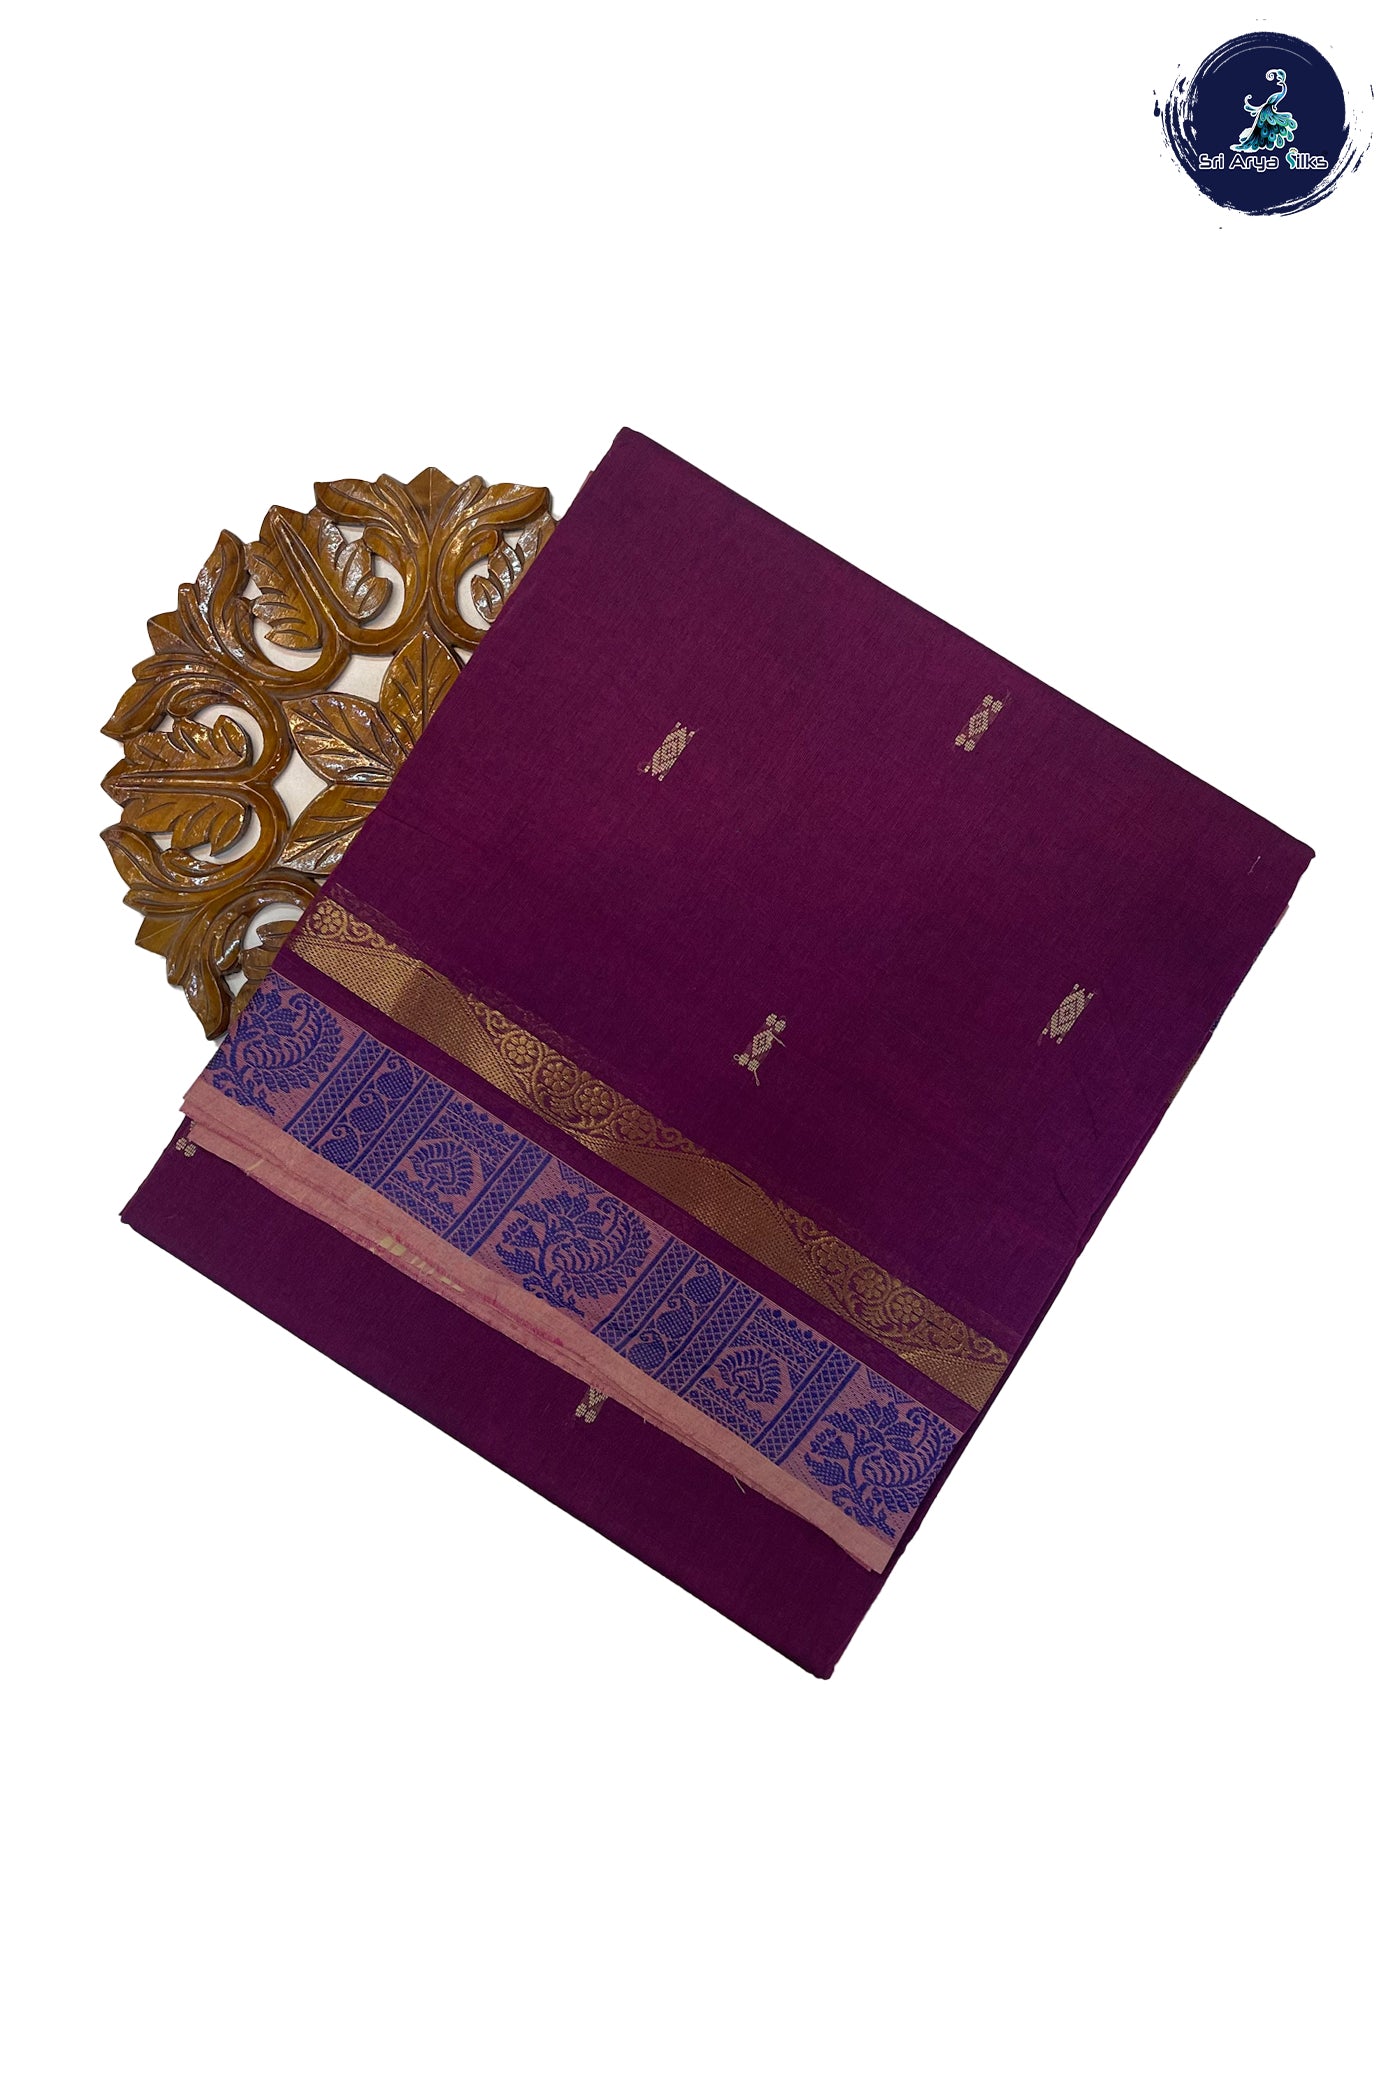 BeetRoot Shade Cotton Saree With Buttas Pattern